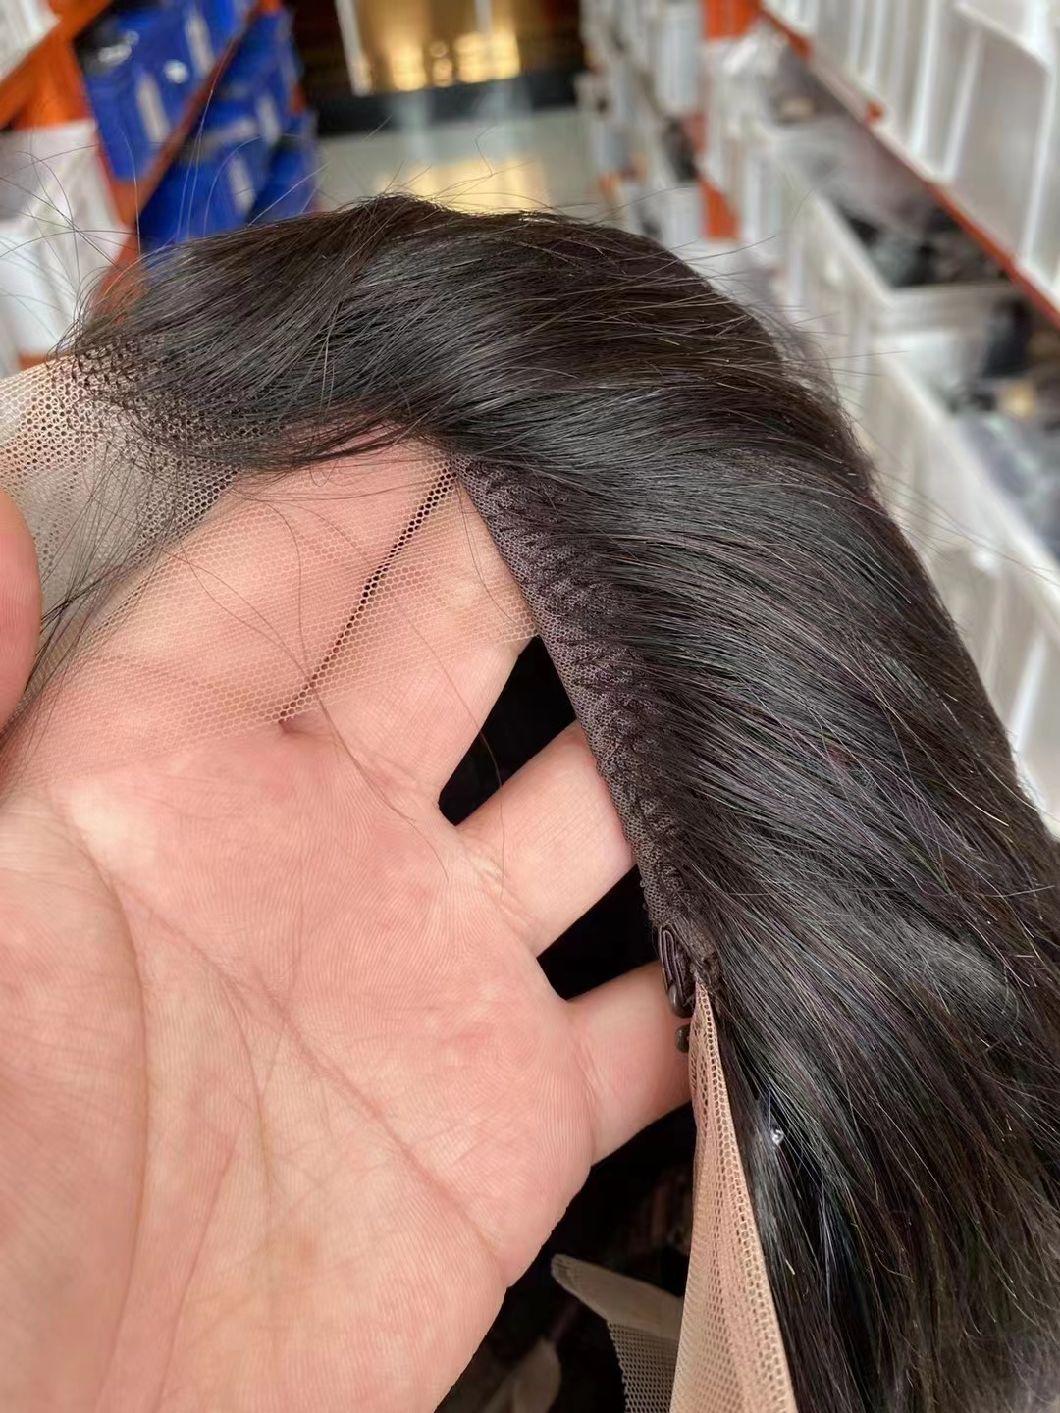 10A Straight HD Lace Front Wigs Human Hair 180% Density 13X4 Brazilian Straight Virgin Lace Frontal Wigs Human Hair Pre Plucked with Baby Hair